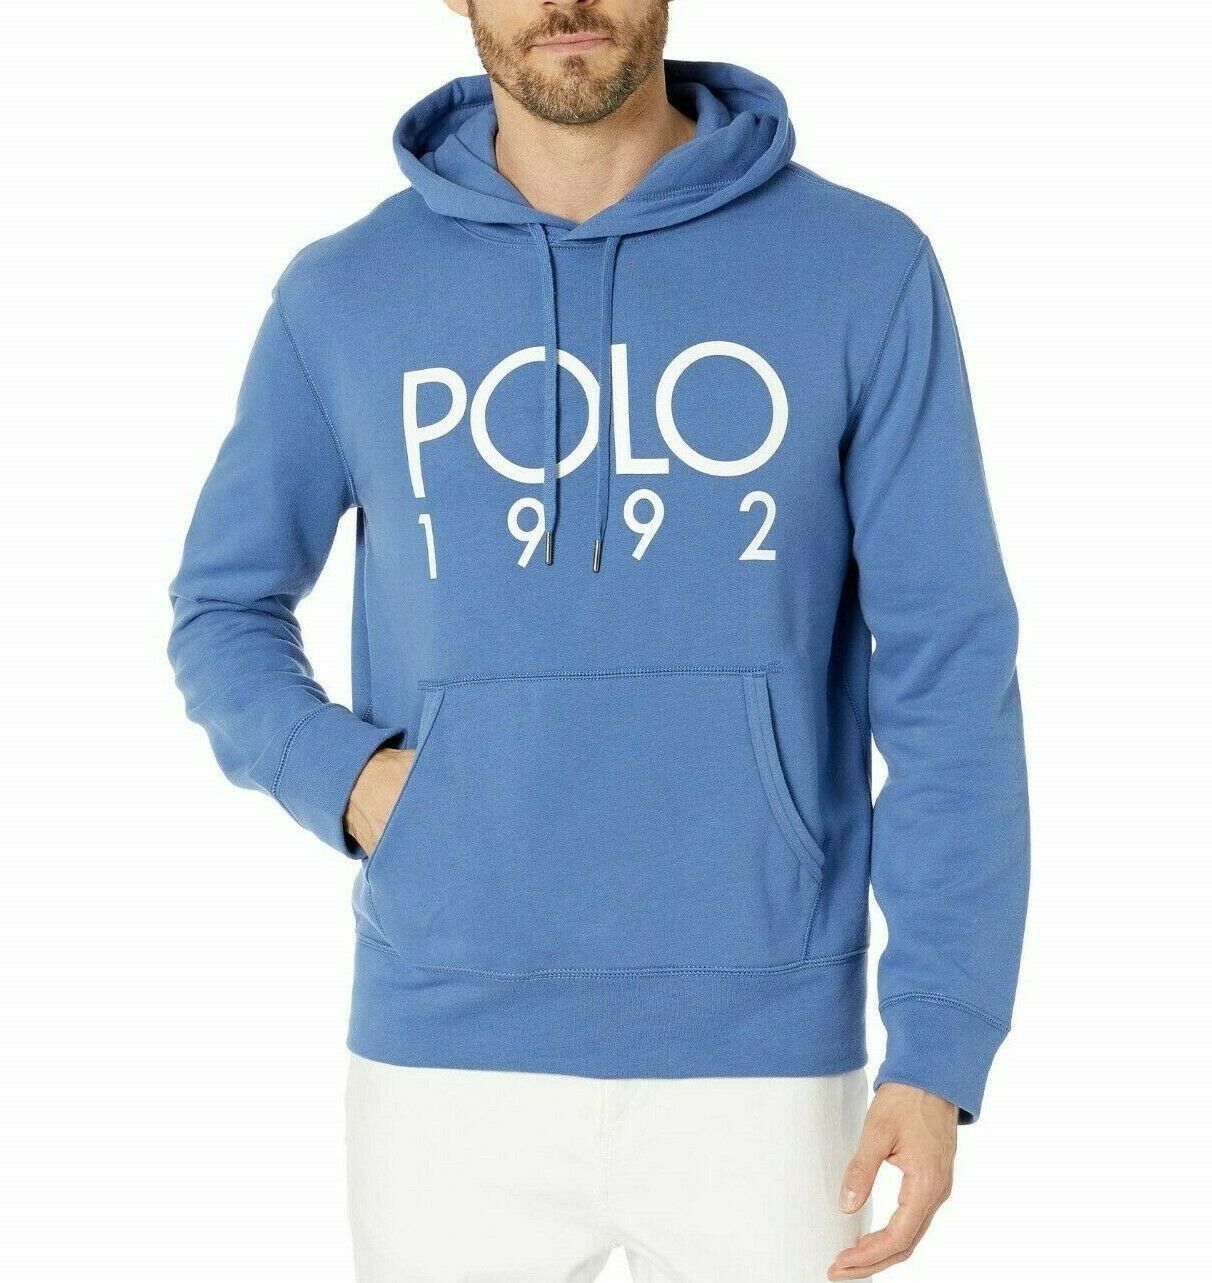 Polo Ralph Lauren Magic Fleece Limited 1992 Collection Bear Knit Sweater Sweatshirt Hoodie - BRAND NEW WITH TAGS